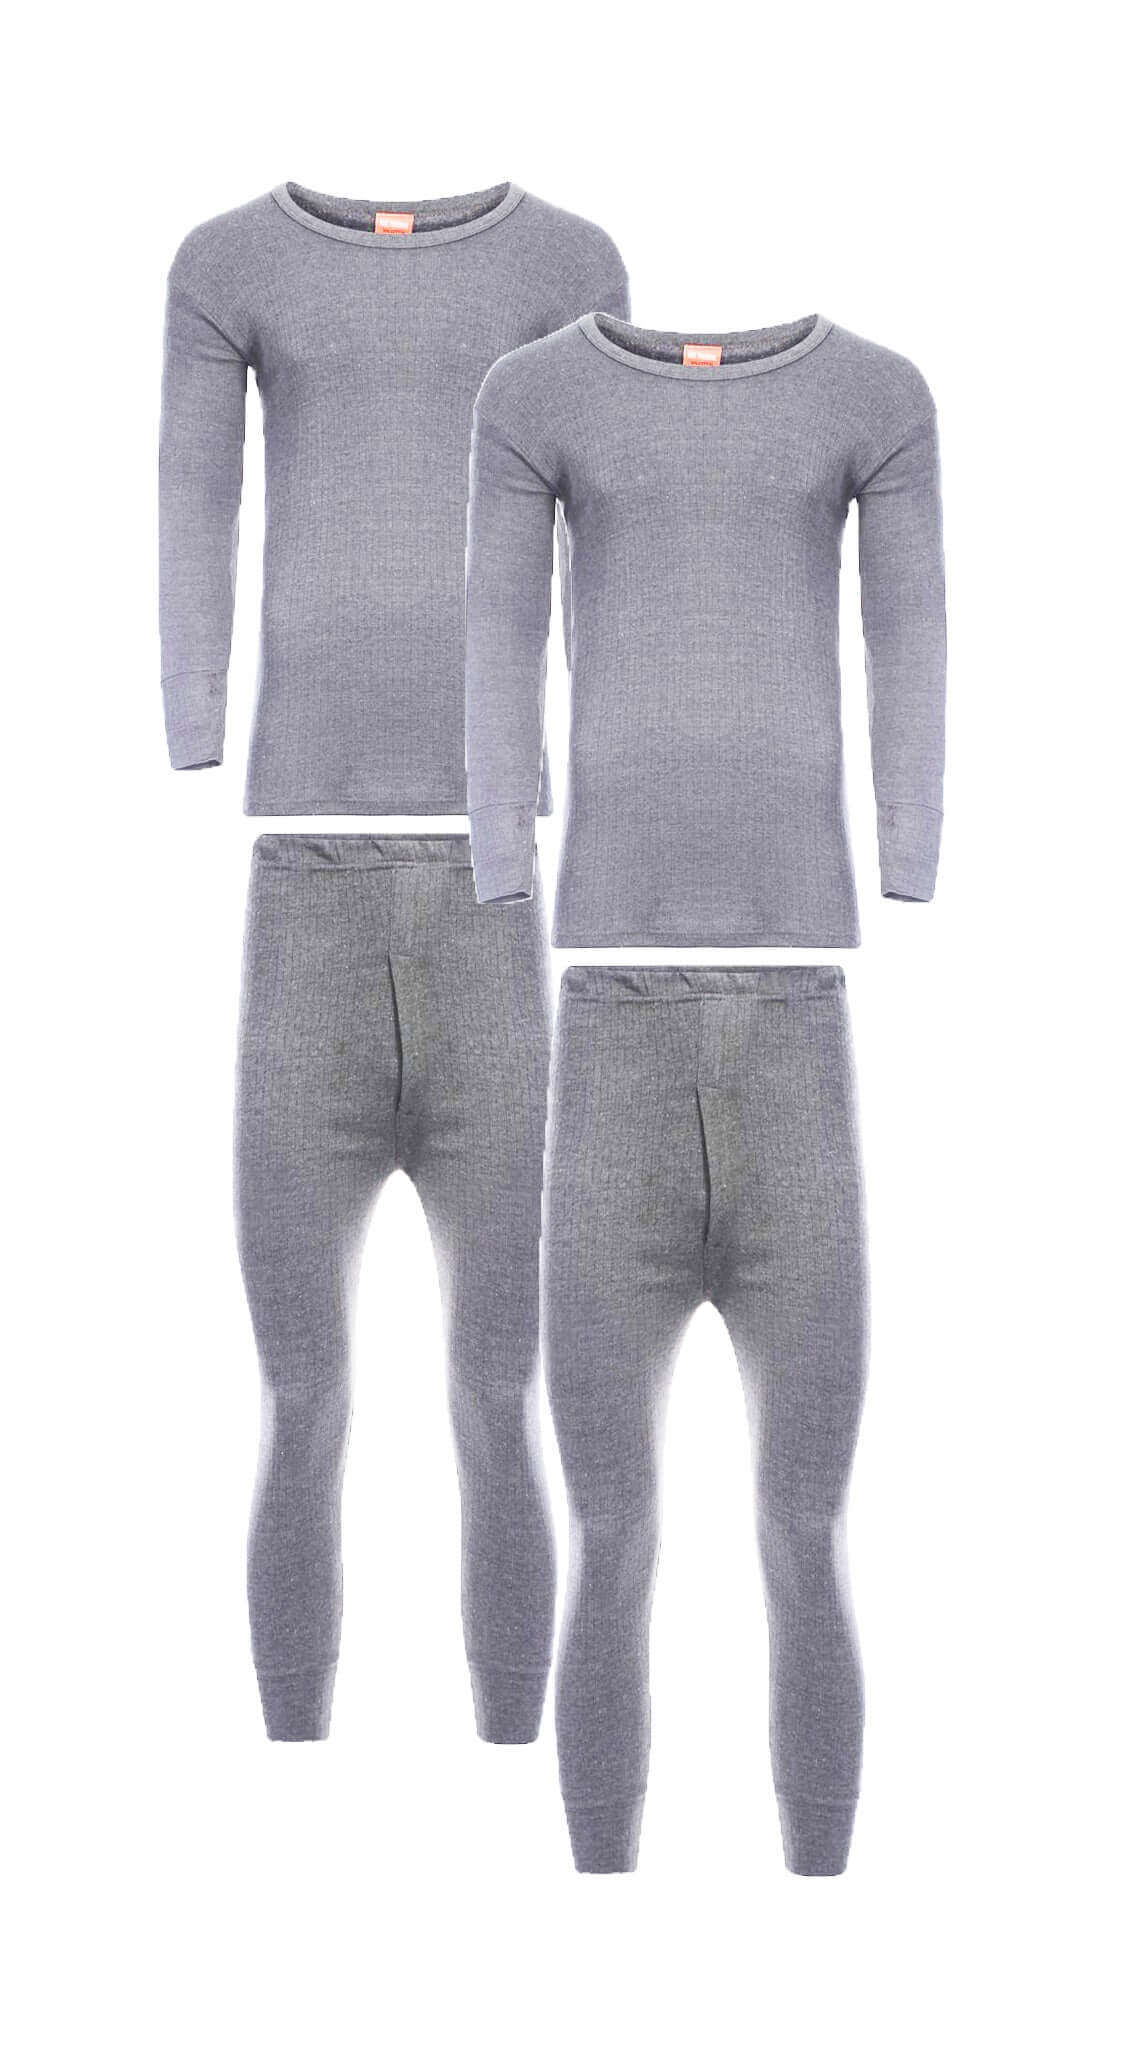 Buy UNIQUEBELLA Men's Thermal Underwear Sets Top & Long Johns Fleece Sweat  Quick Drying Thermo Base Layer, Sets Grey, XX-Large at